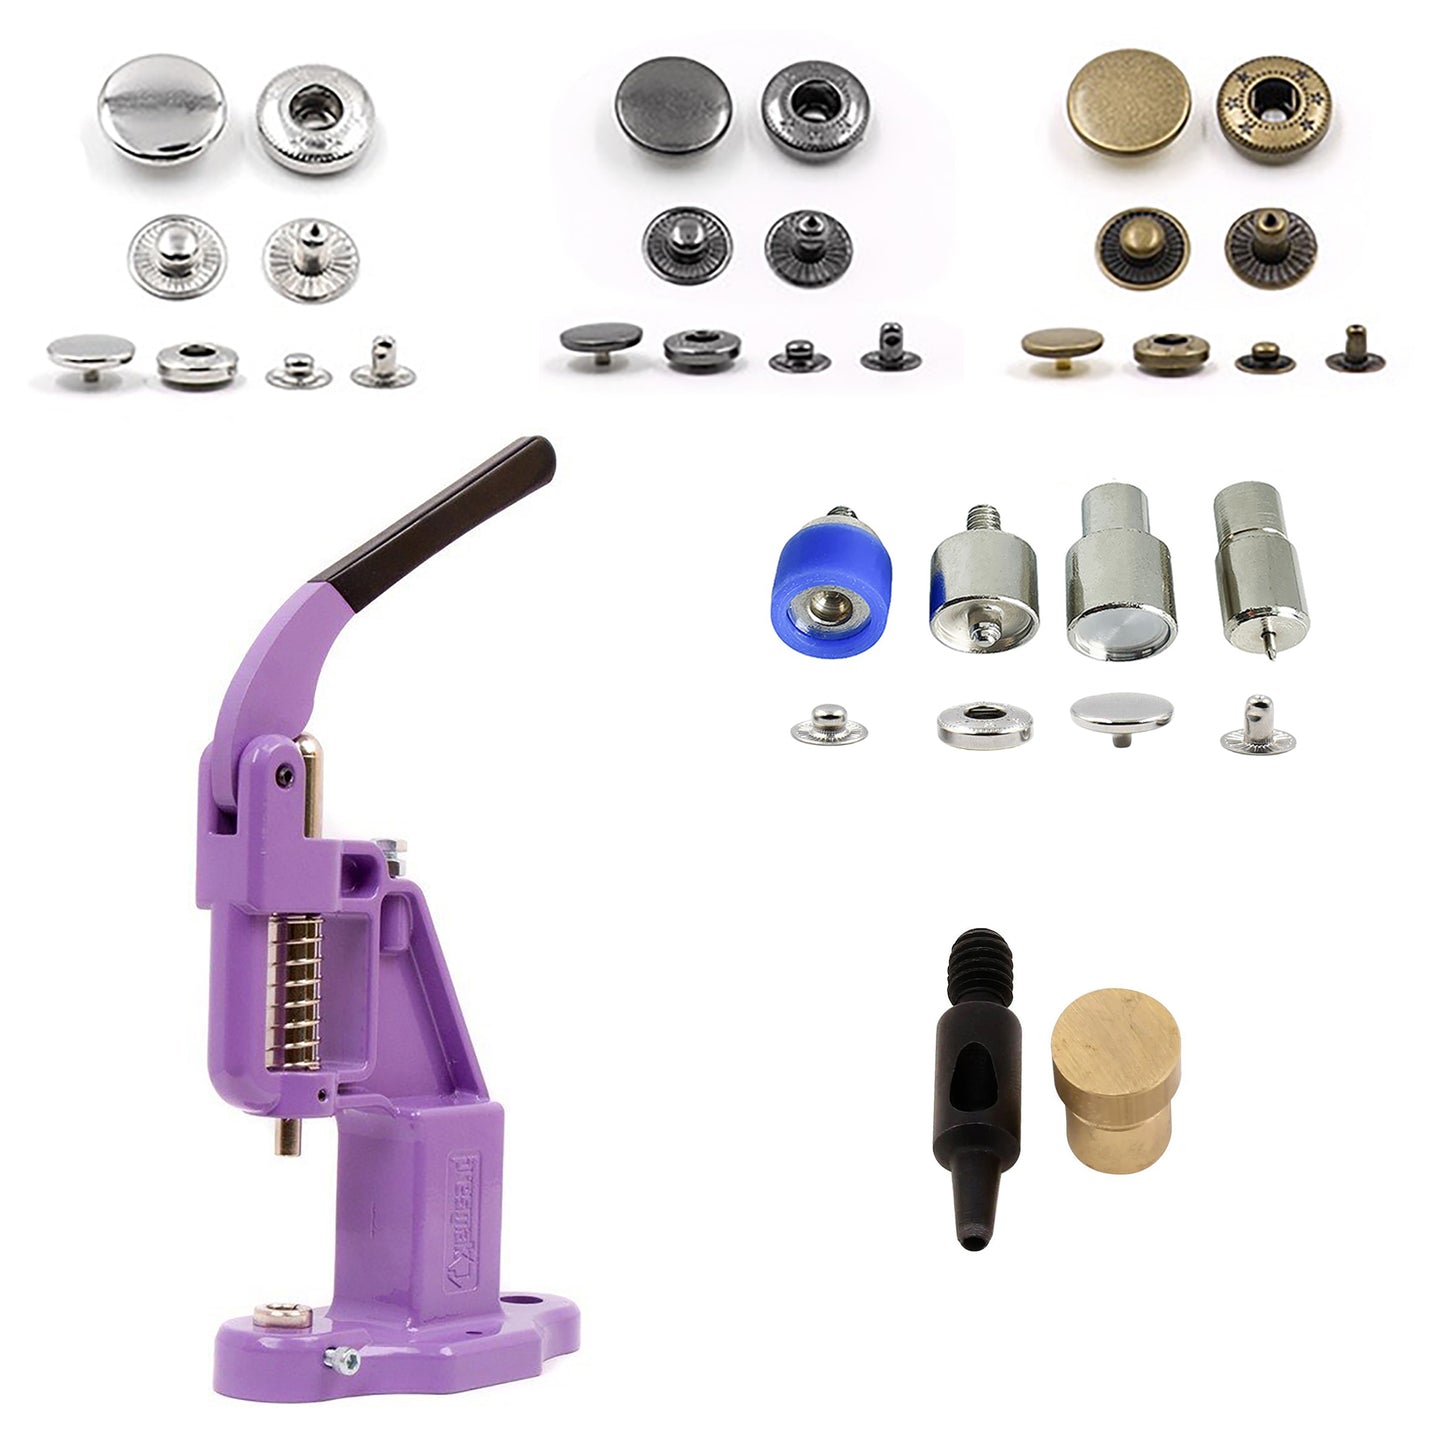 HOBBY TRENDY Hand Press with 15mm (ln24) 300 Sets of Stainless Steel Fashion Spring Snap Buttons with Dies and Hole Punch